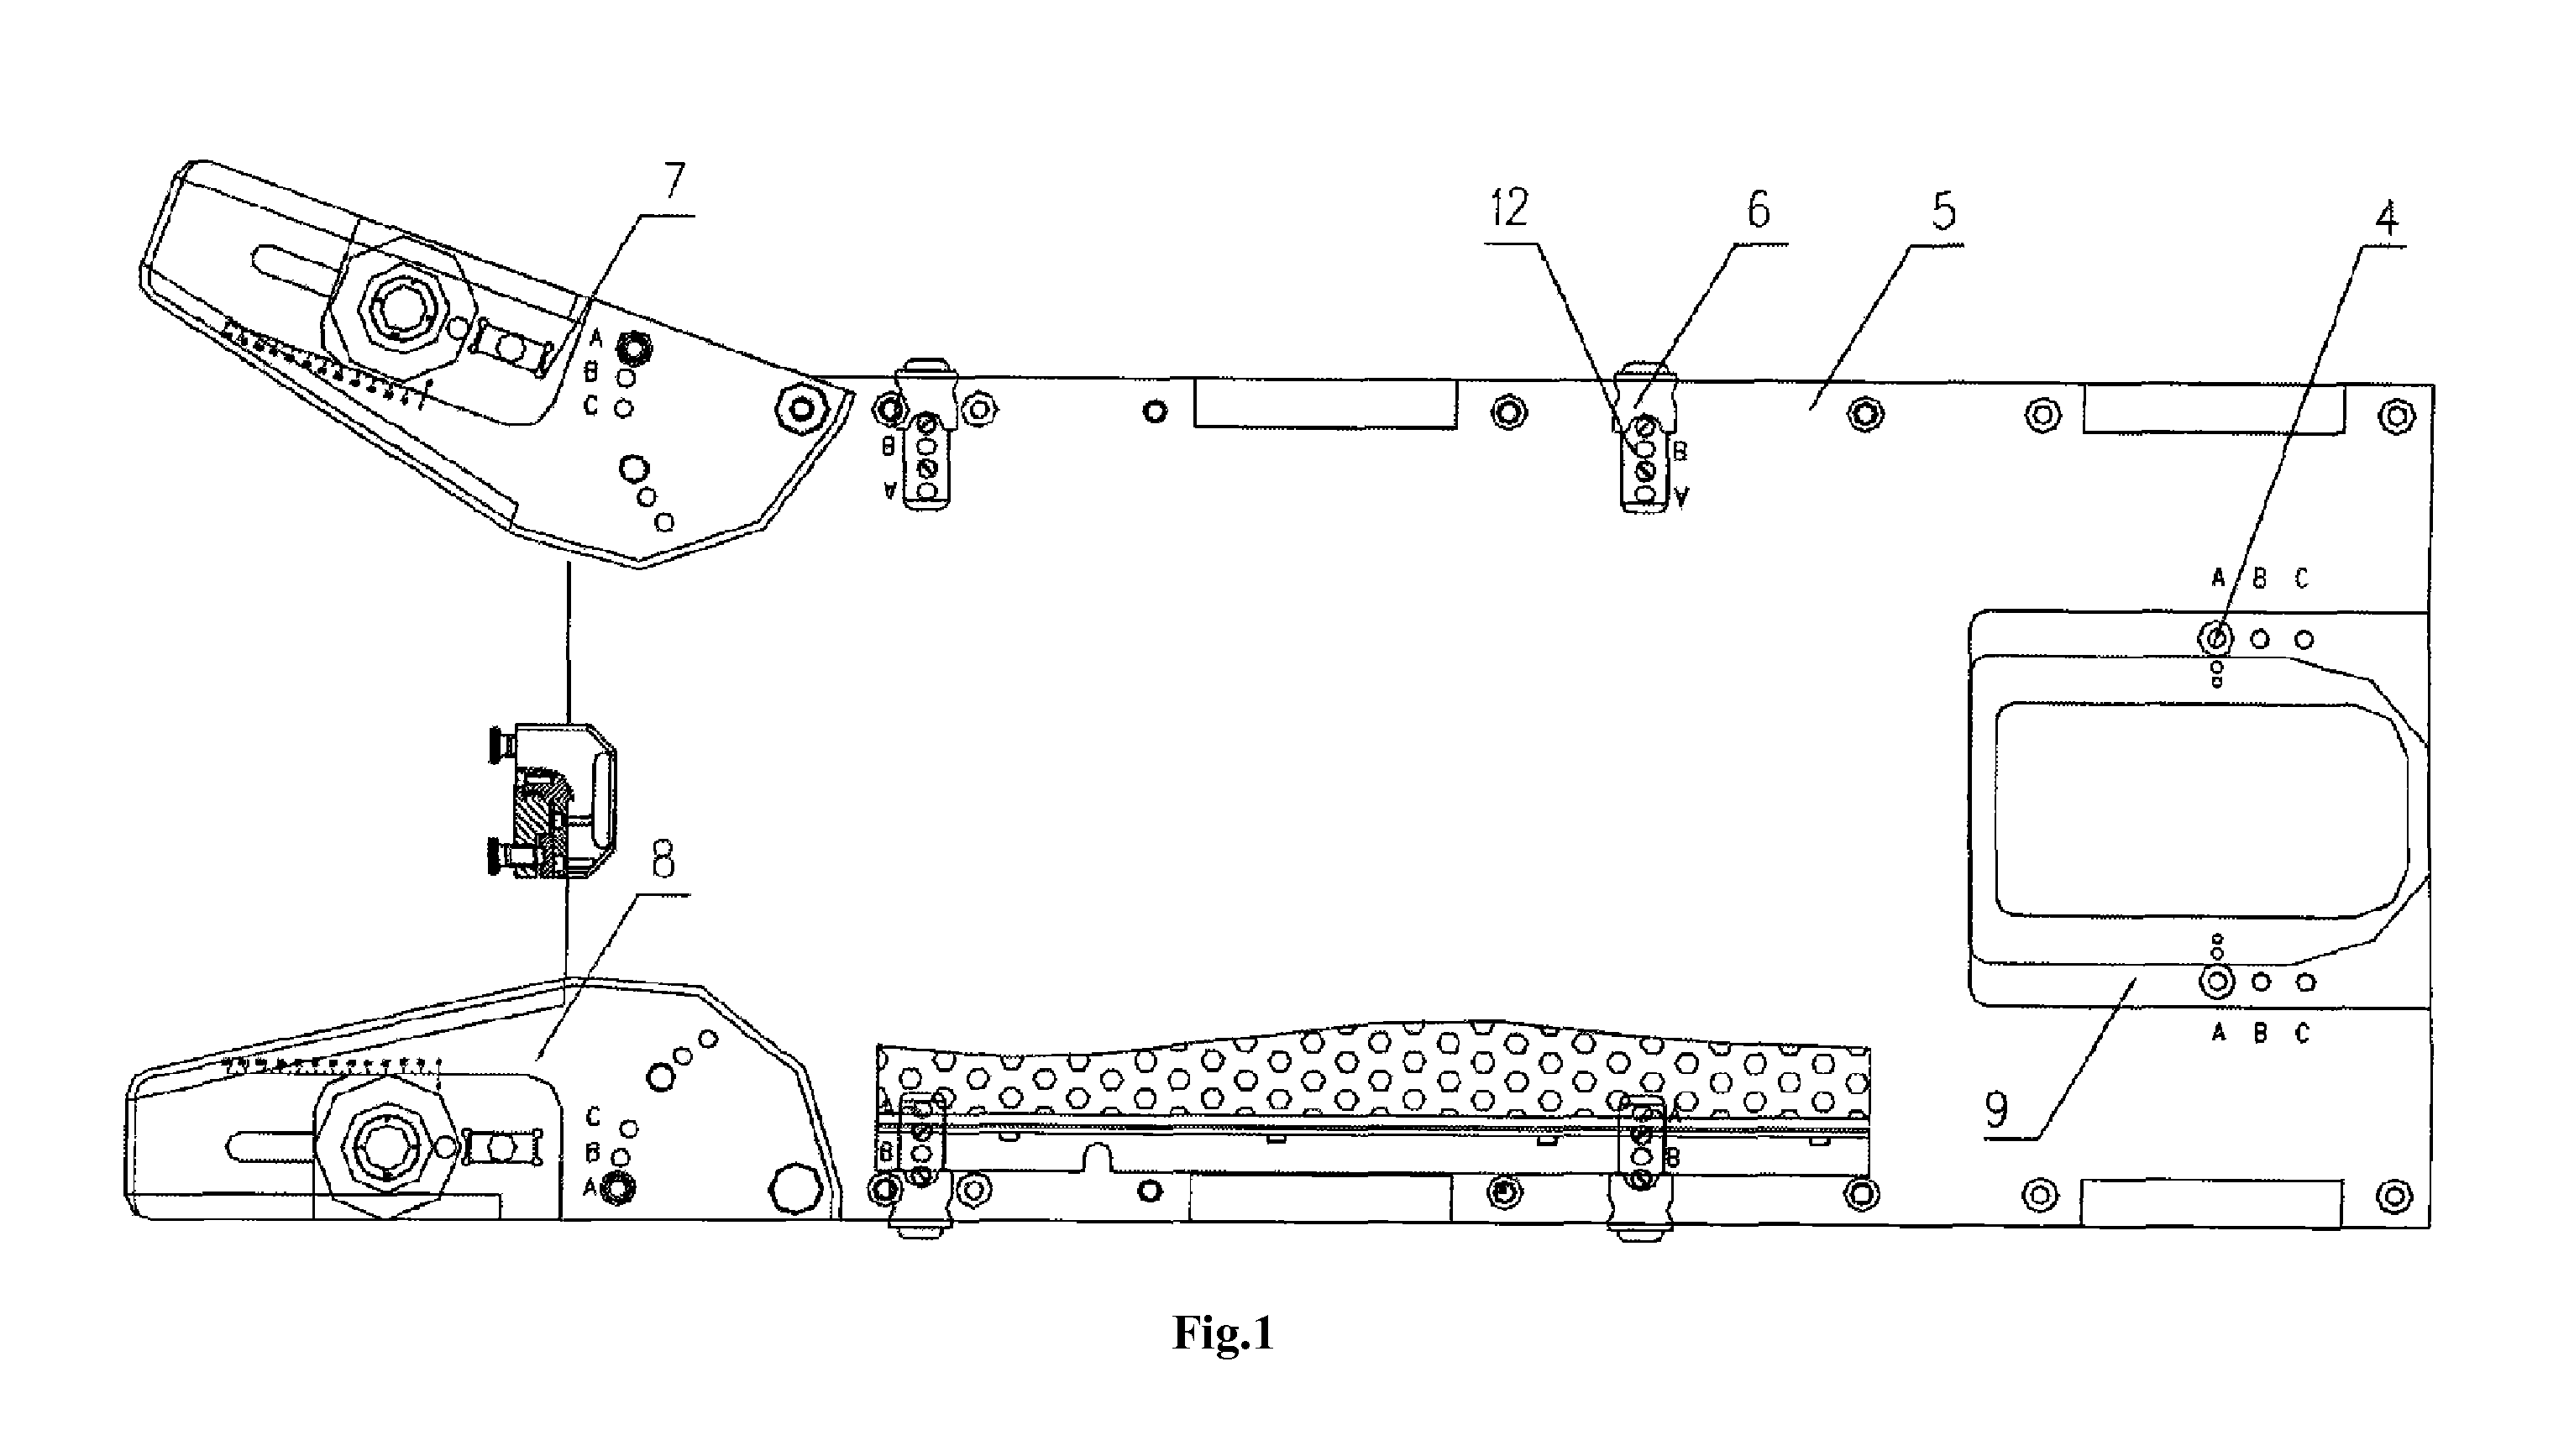 Lithotomy position afterloading carbon fiber treatment couch under image guidance